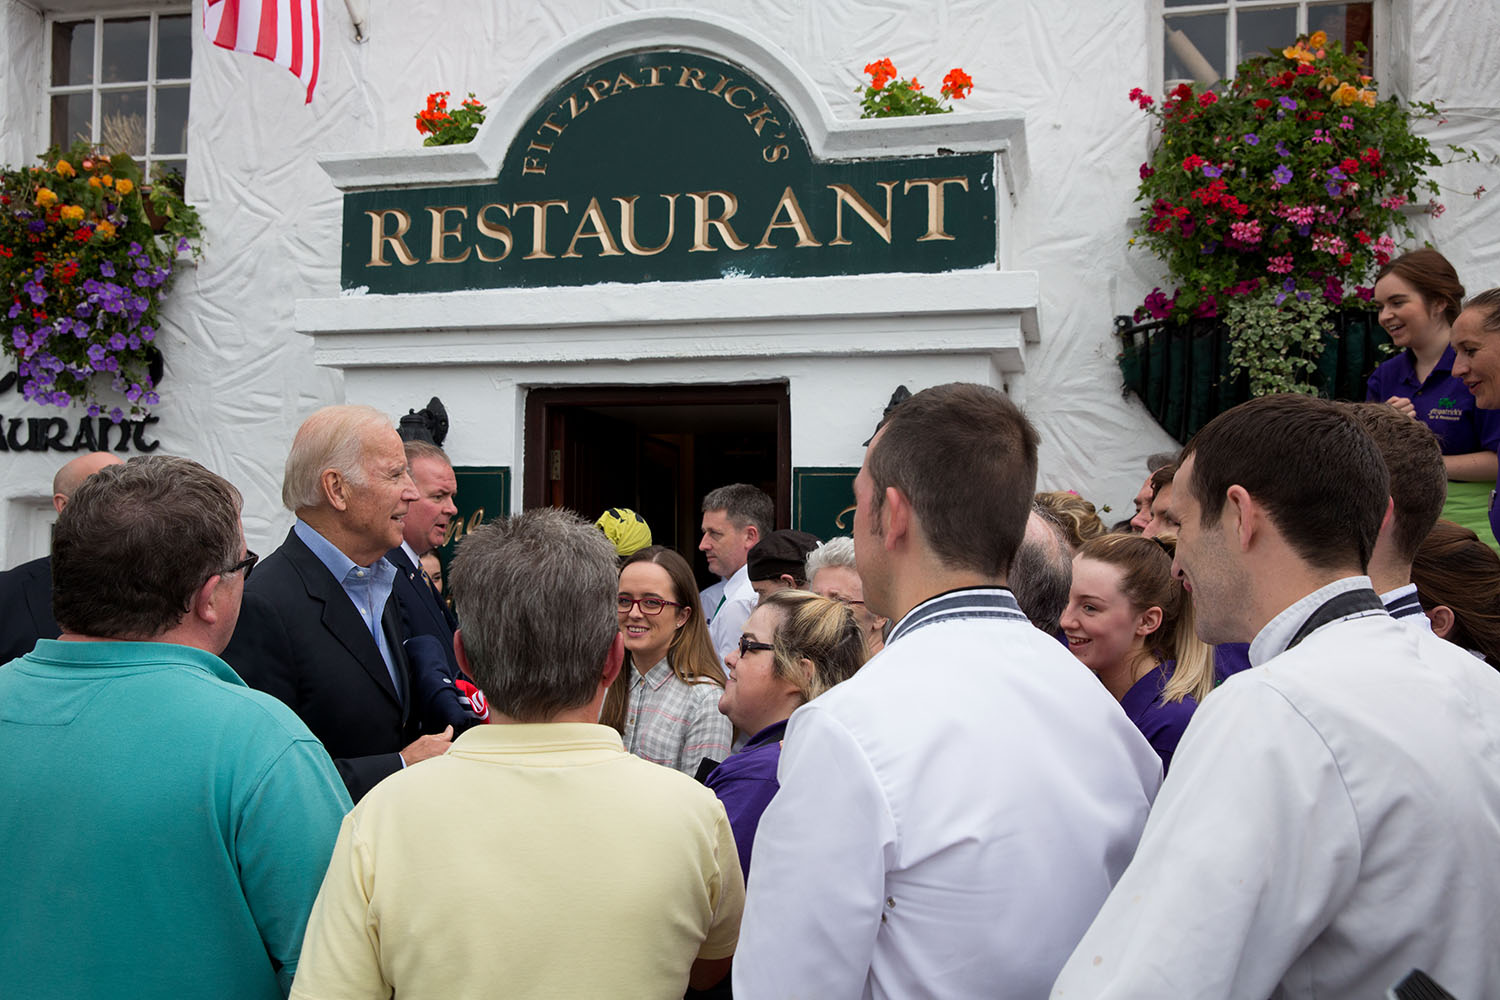 Vice President Joe Biden greets restaurant staff outside Fitzpatrick's Restaurant and Pub after a family lunch, in Dundalk, County Louth, Ireland, June 25, 2016. (Official White House Photo by David Lienemann)